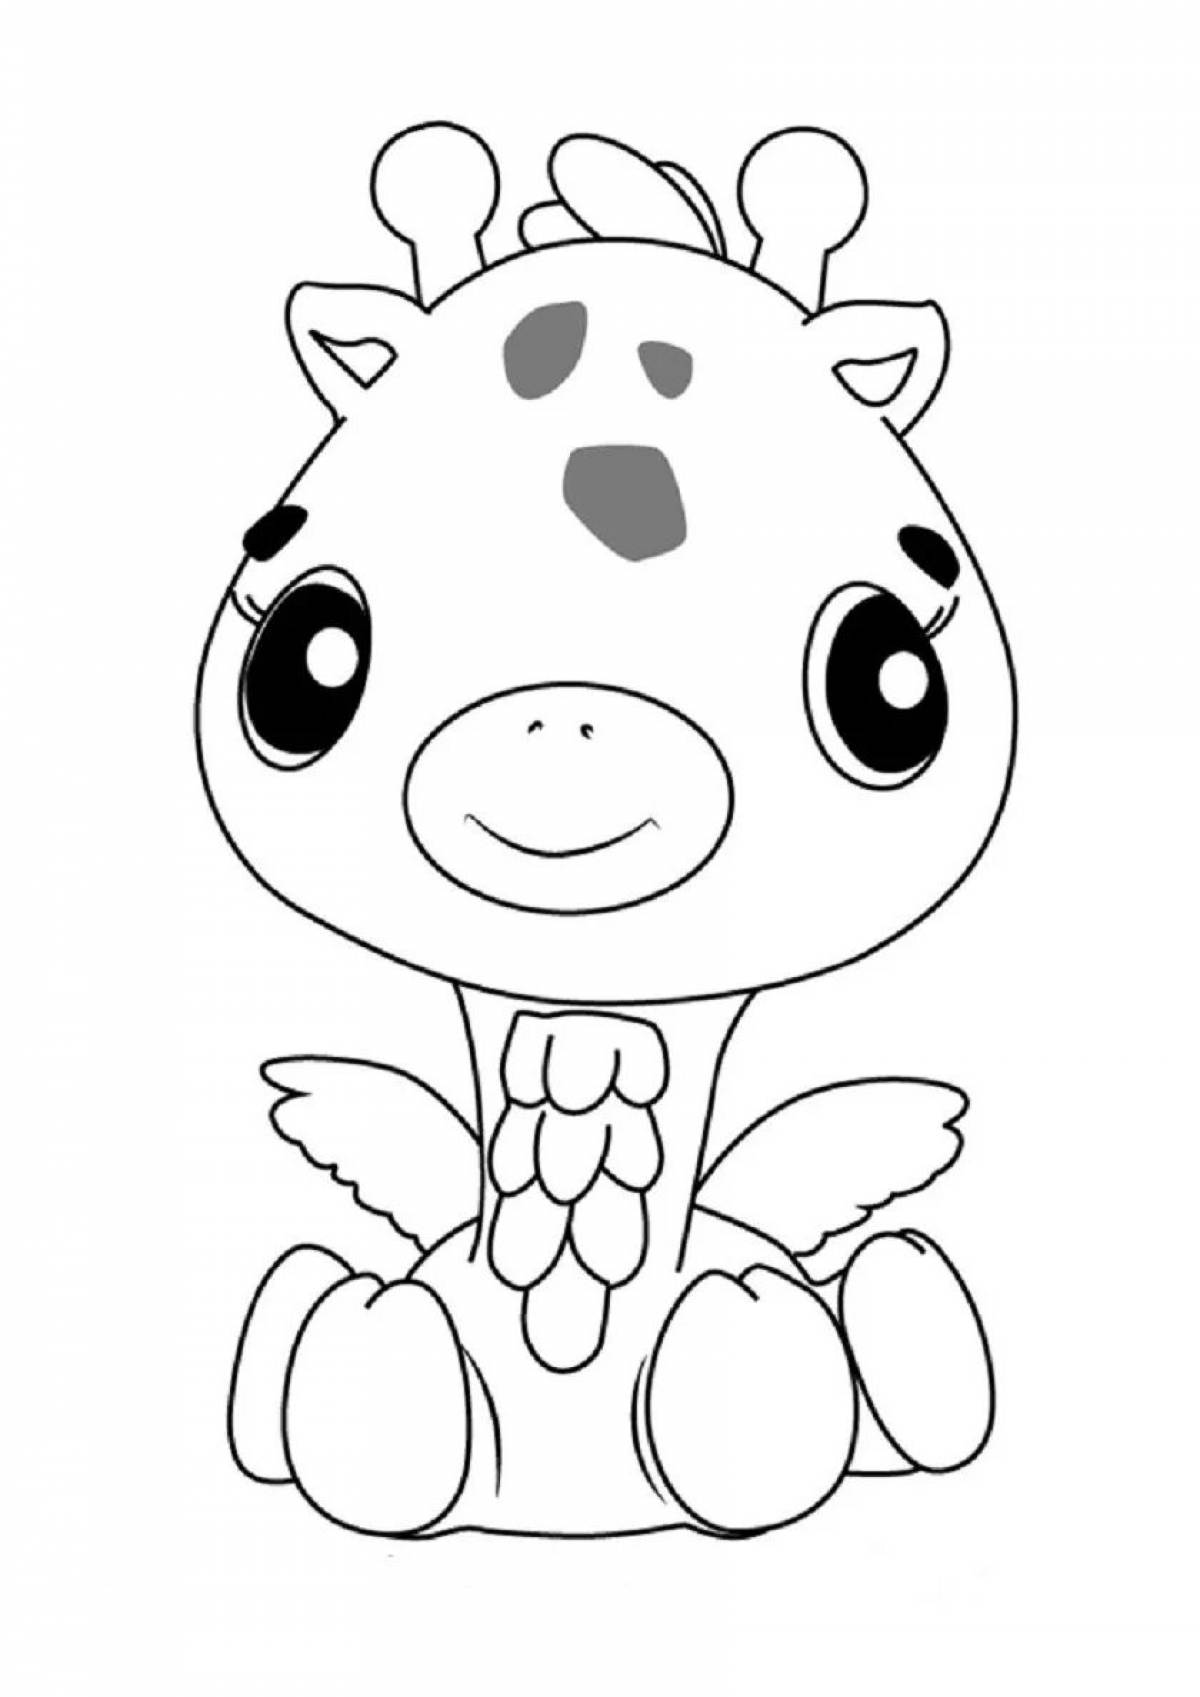 Hechimols dramatic coloring pages